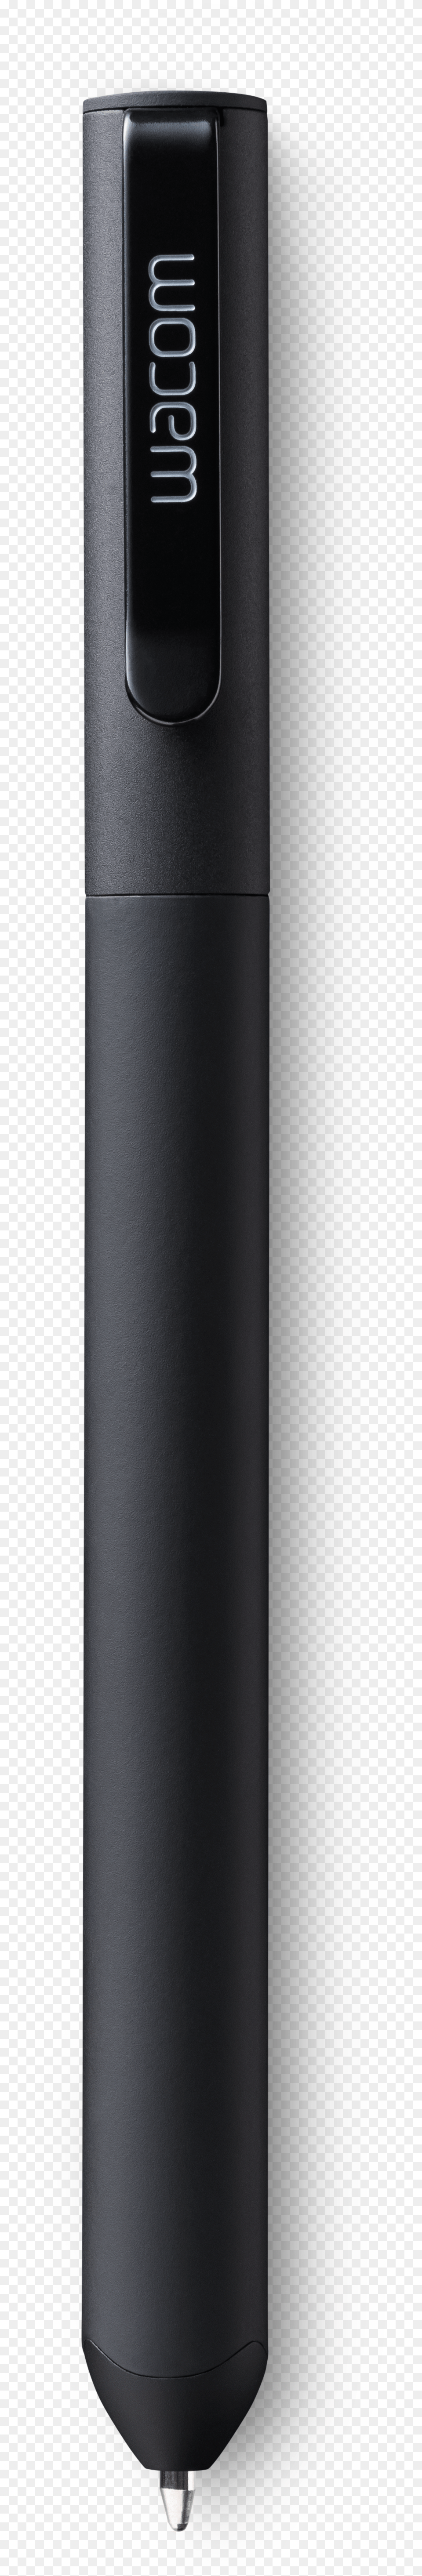 Ballpointpen 2 Smartphone, Electrical Device, Microphone, Bottle Png Image